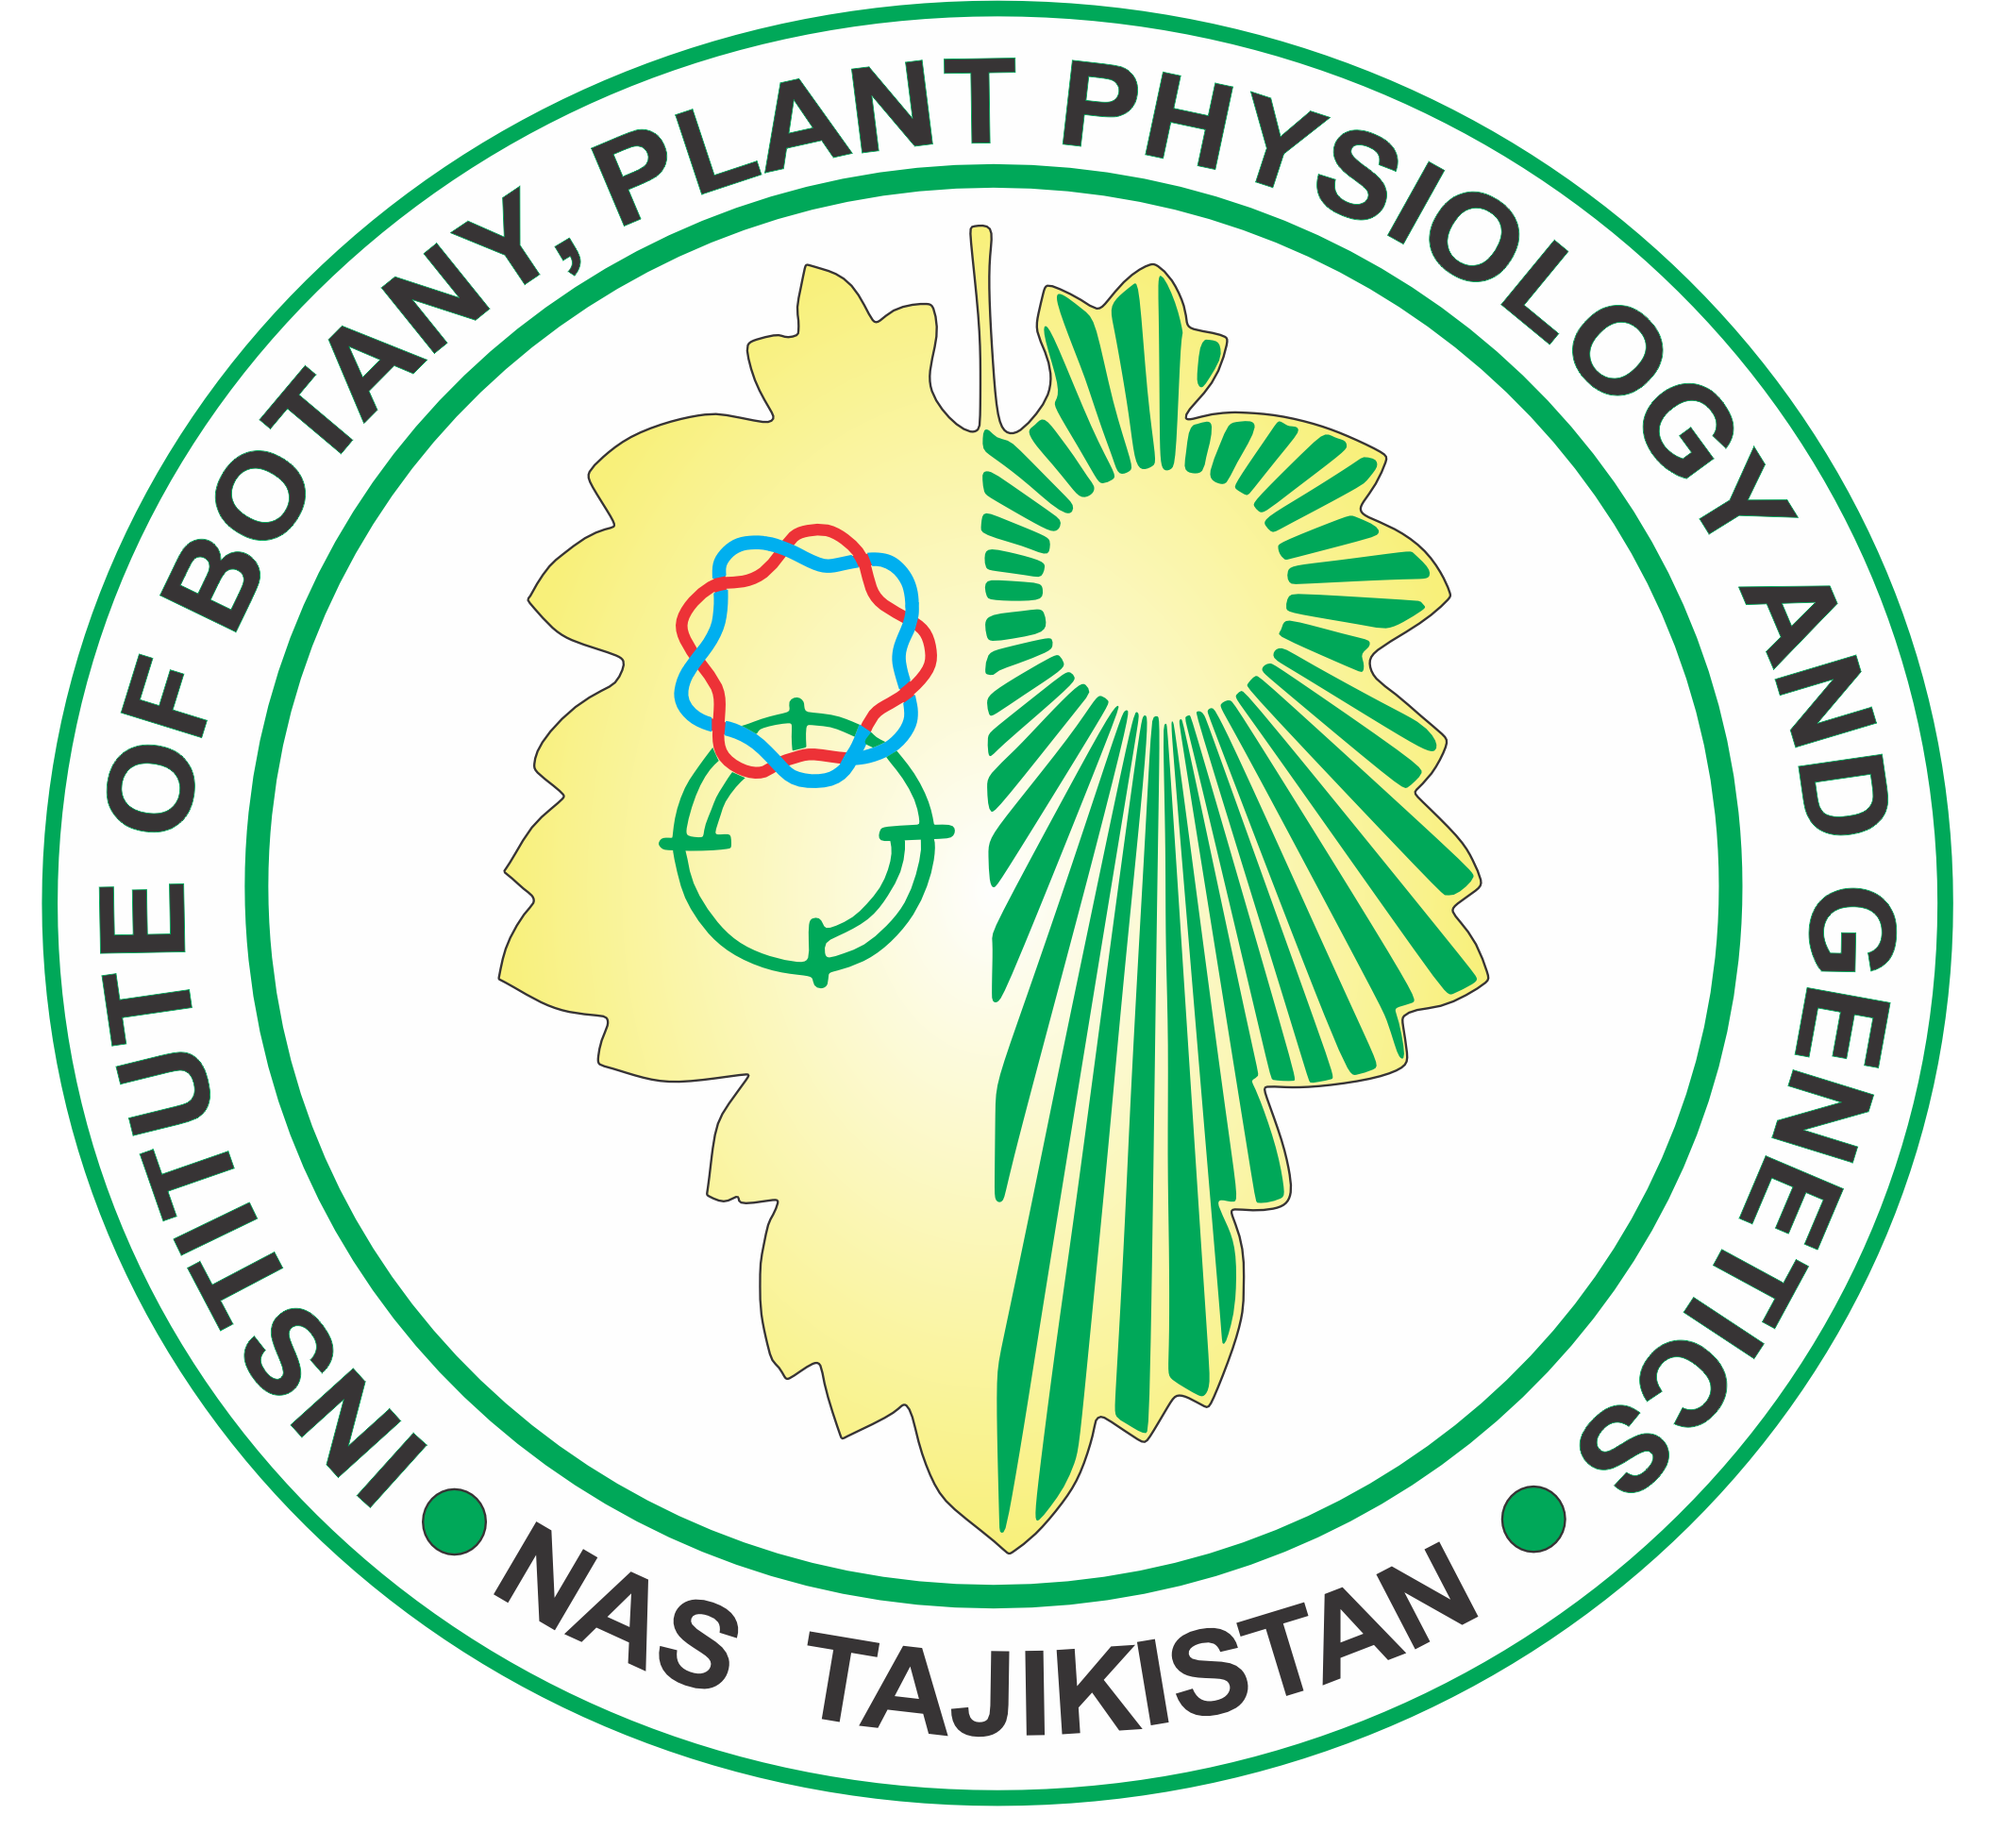 Institute of Botany, Plant Physiology and Genetics, National Academy of Sciences of Tajikistan